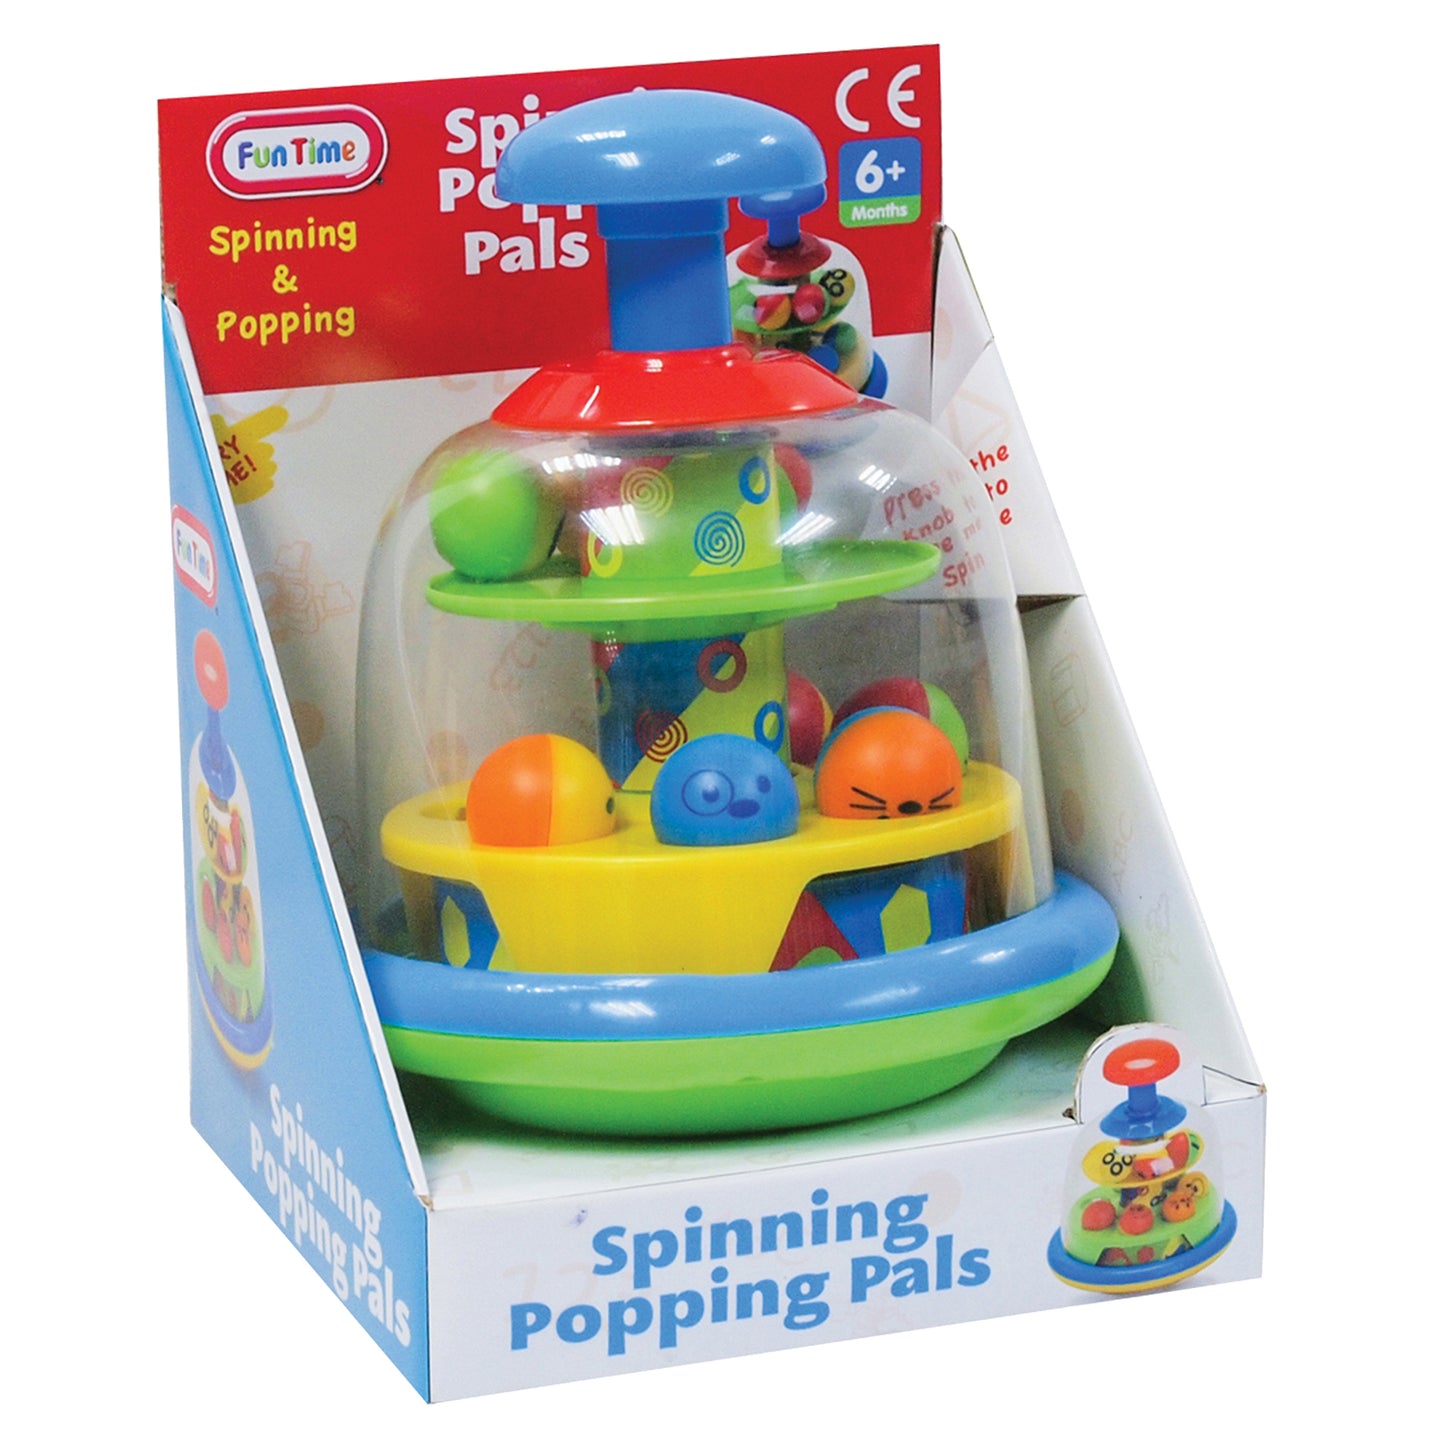 Spinning Popping Pals